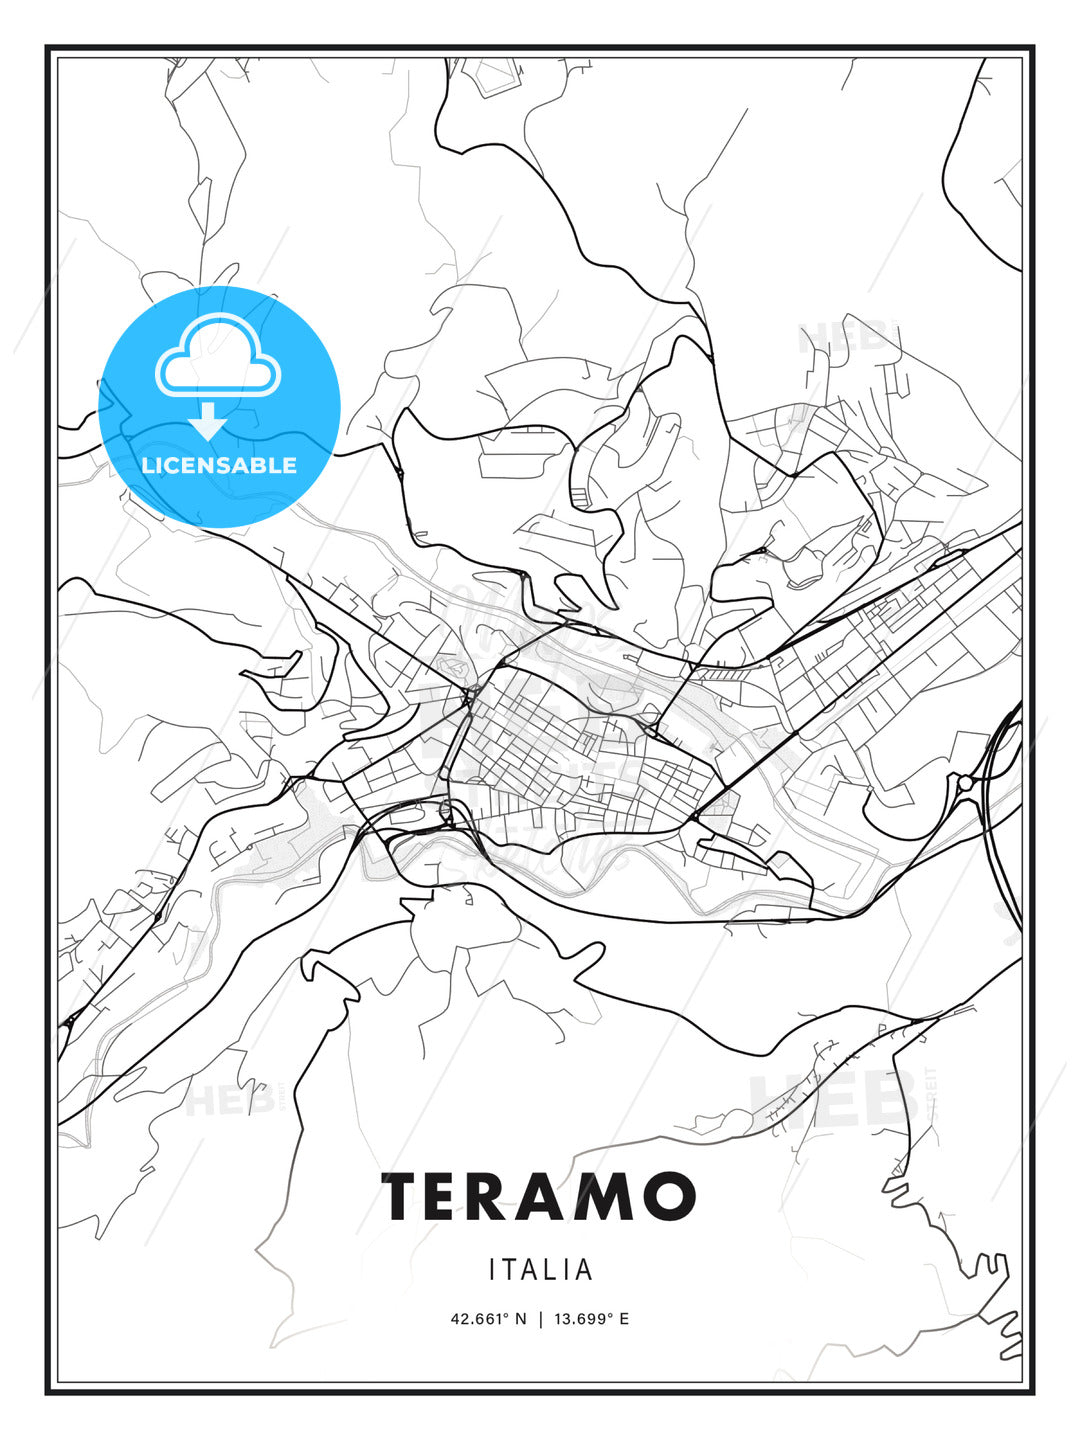 Teramo, Italy, Modern Print Template in Various Formats - HEBSTREITS Sketches